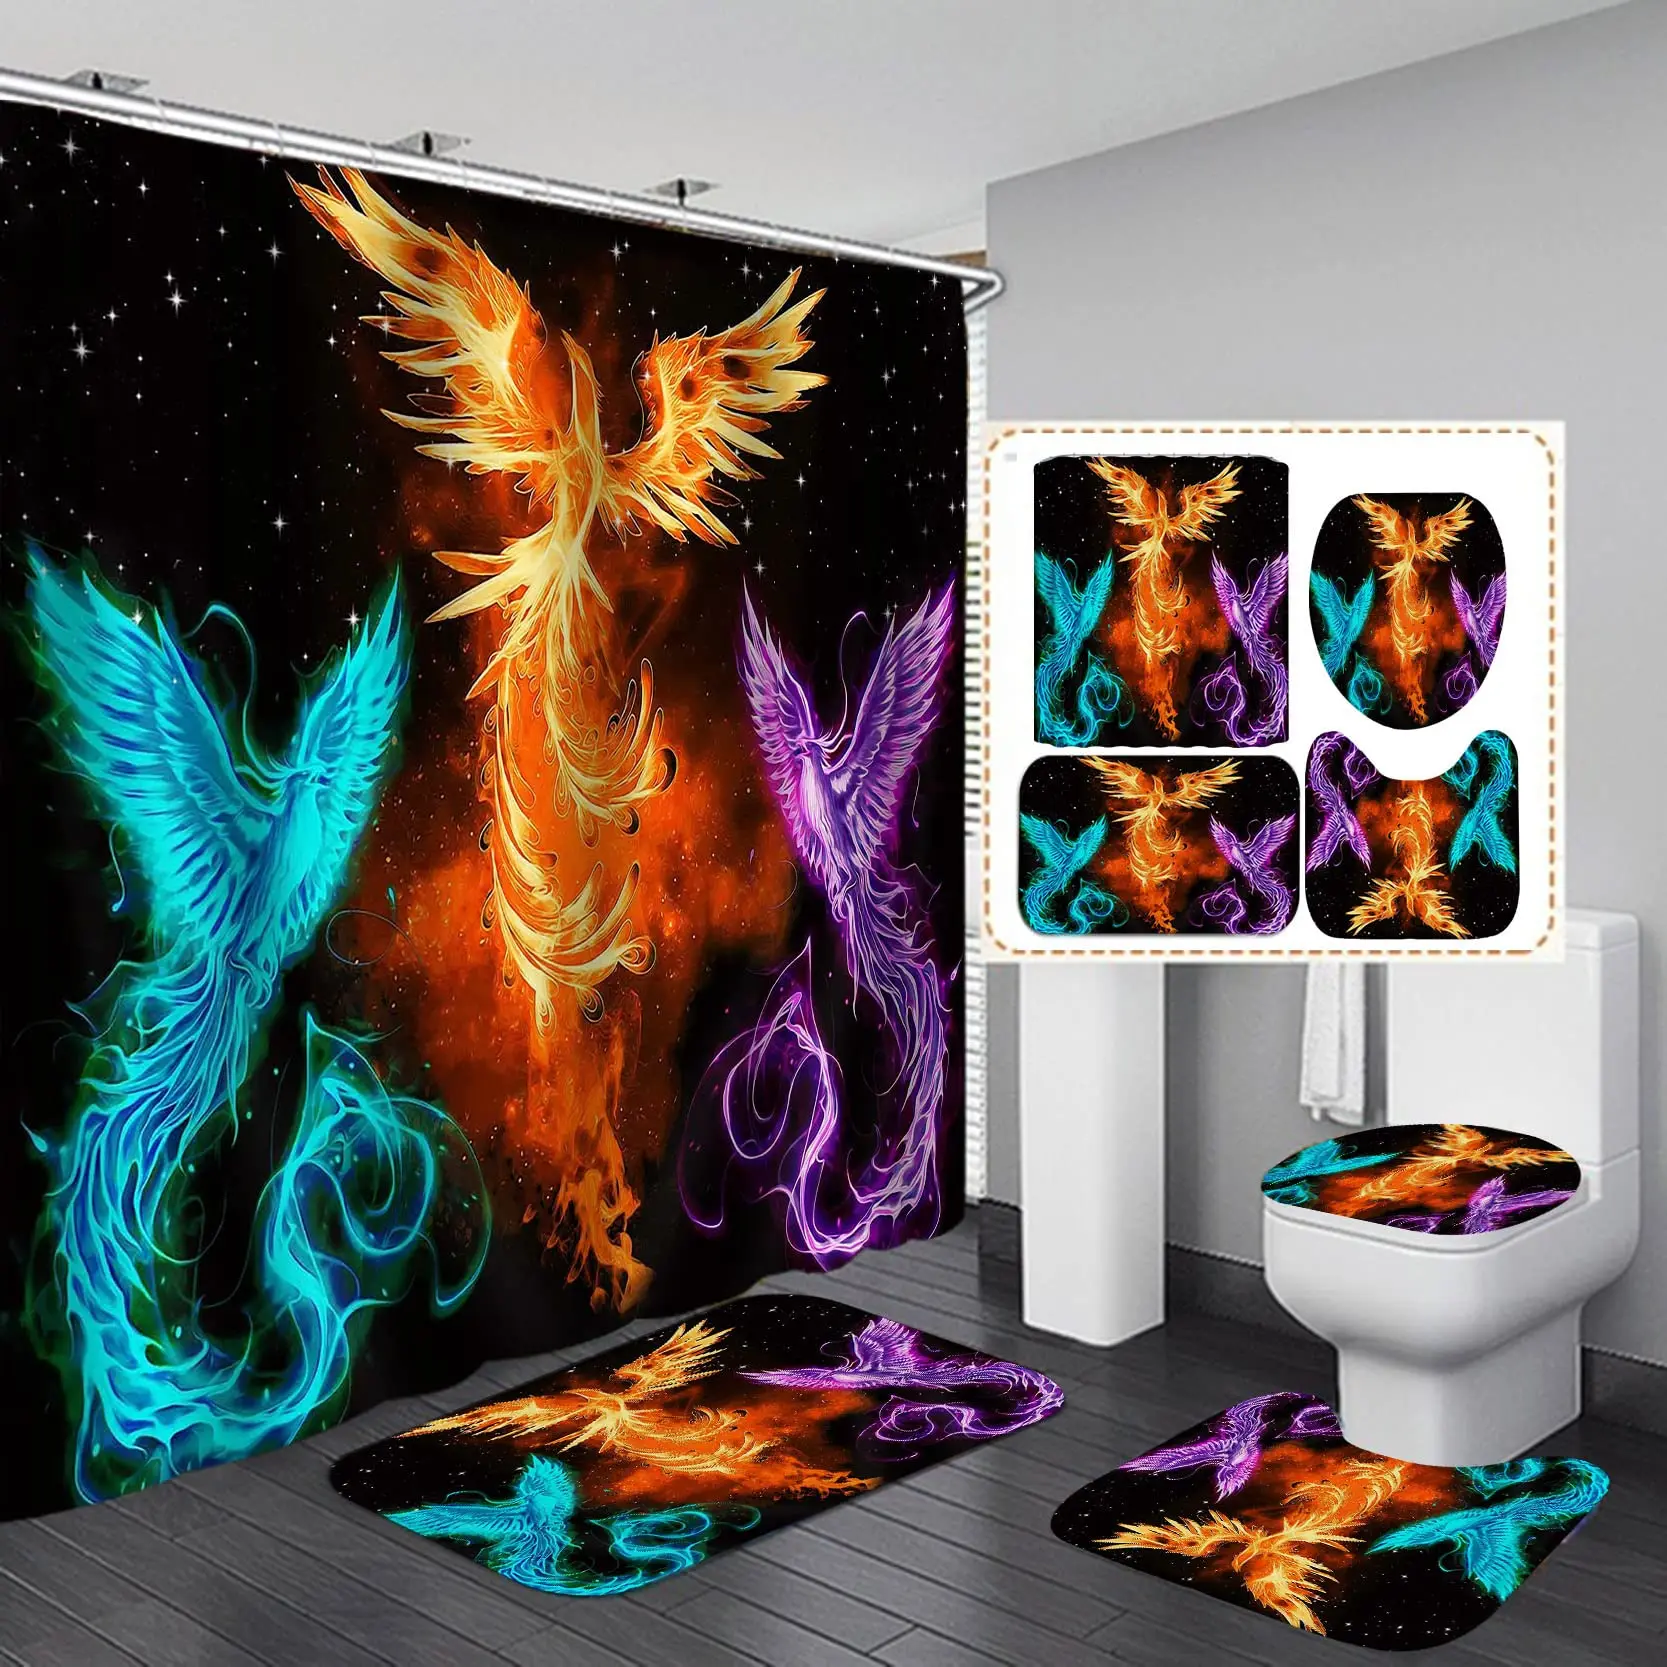 Galaxy Fire Phoenix Shower Curtain Set with Rugs Starry Sky Flaming Firebird Mythical Creatures Fantasy Animal Bathroom Sets